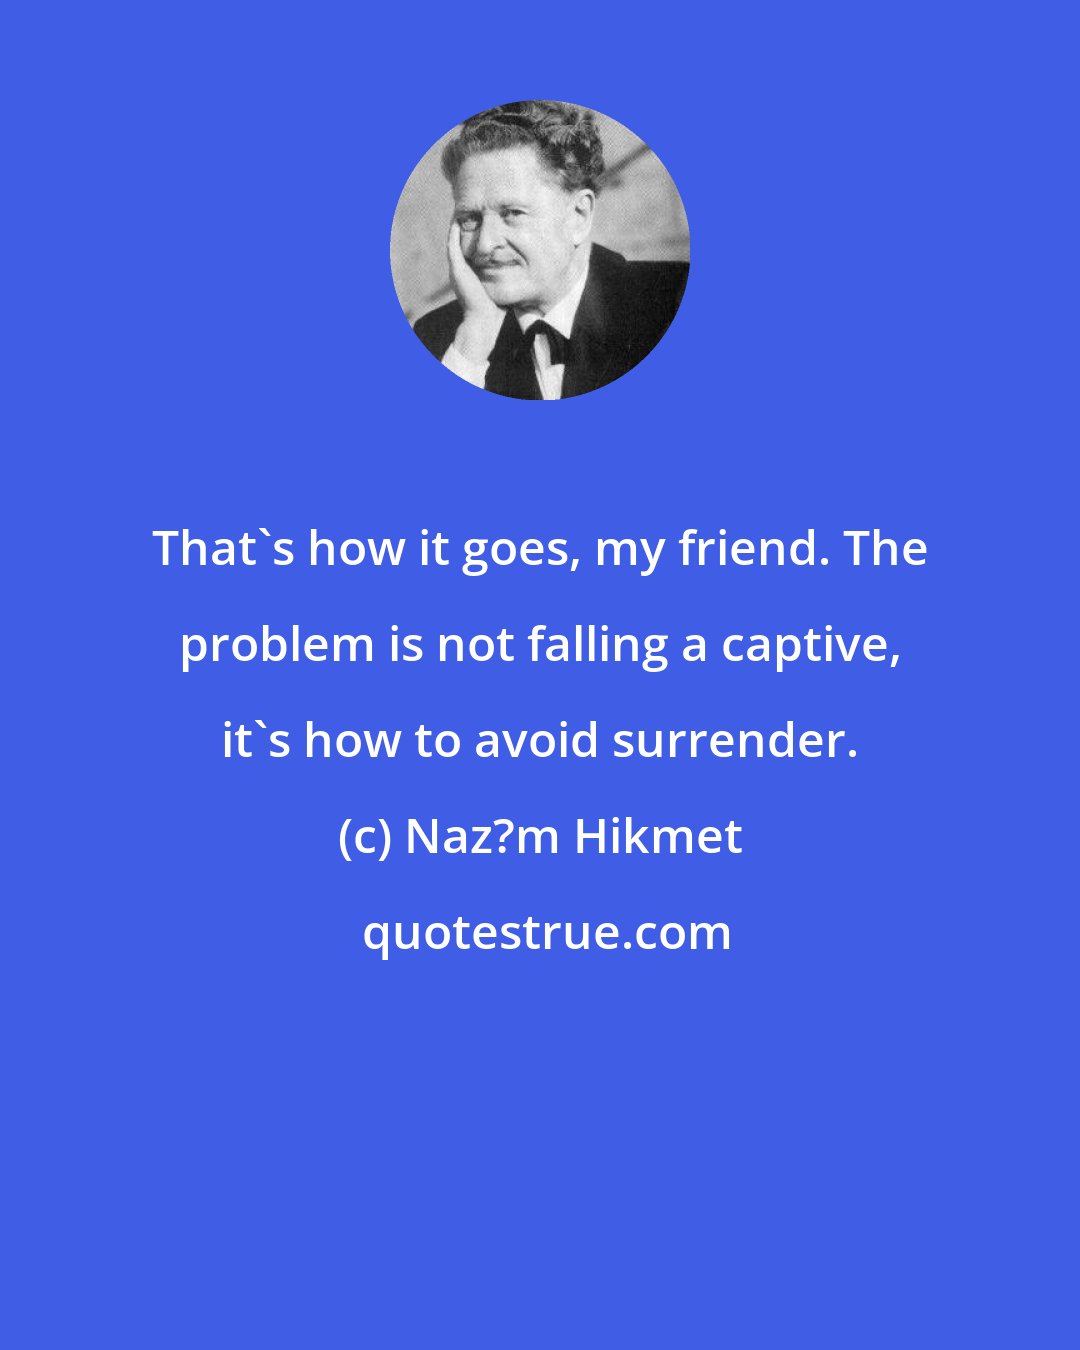 Naz?m Hikmet: That's how it goes, my friend. The problem is not falling a captive, it's how to avoid surrender.